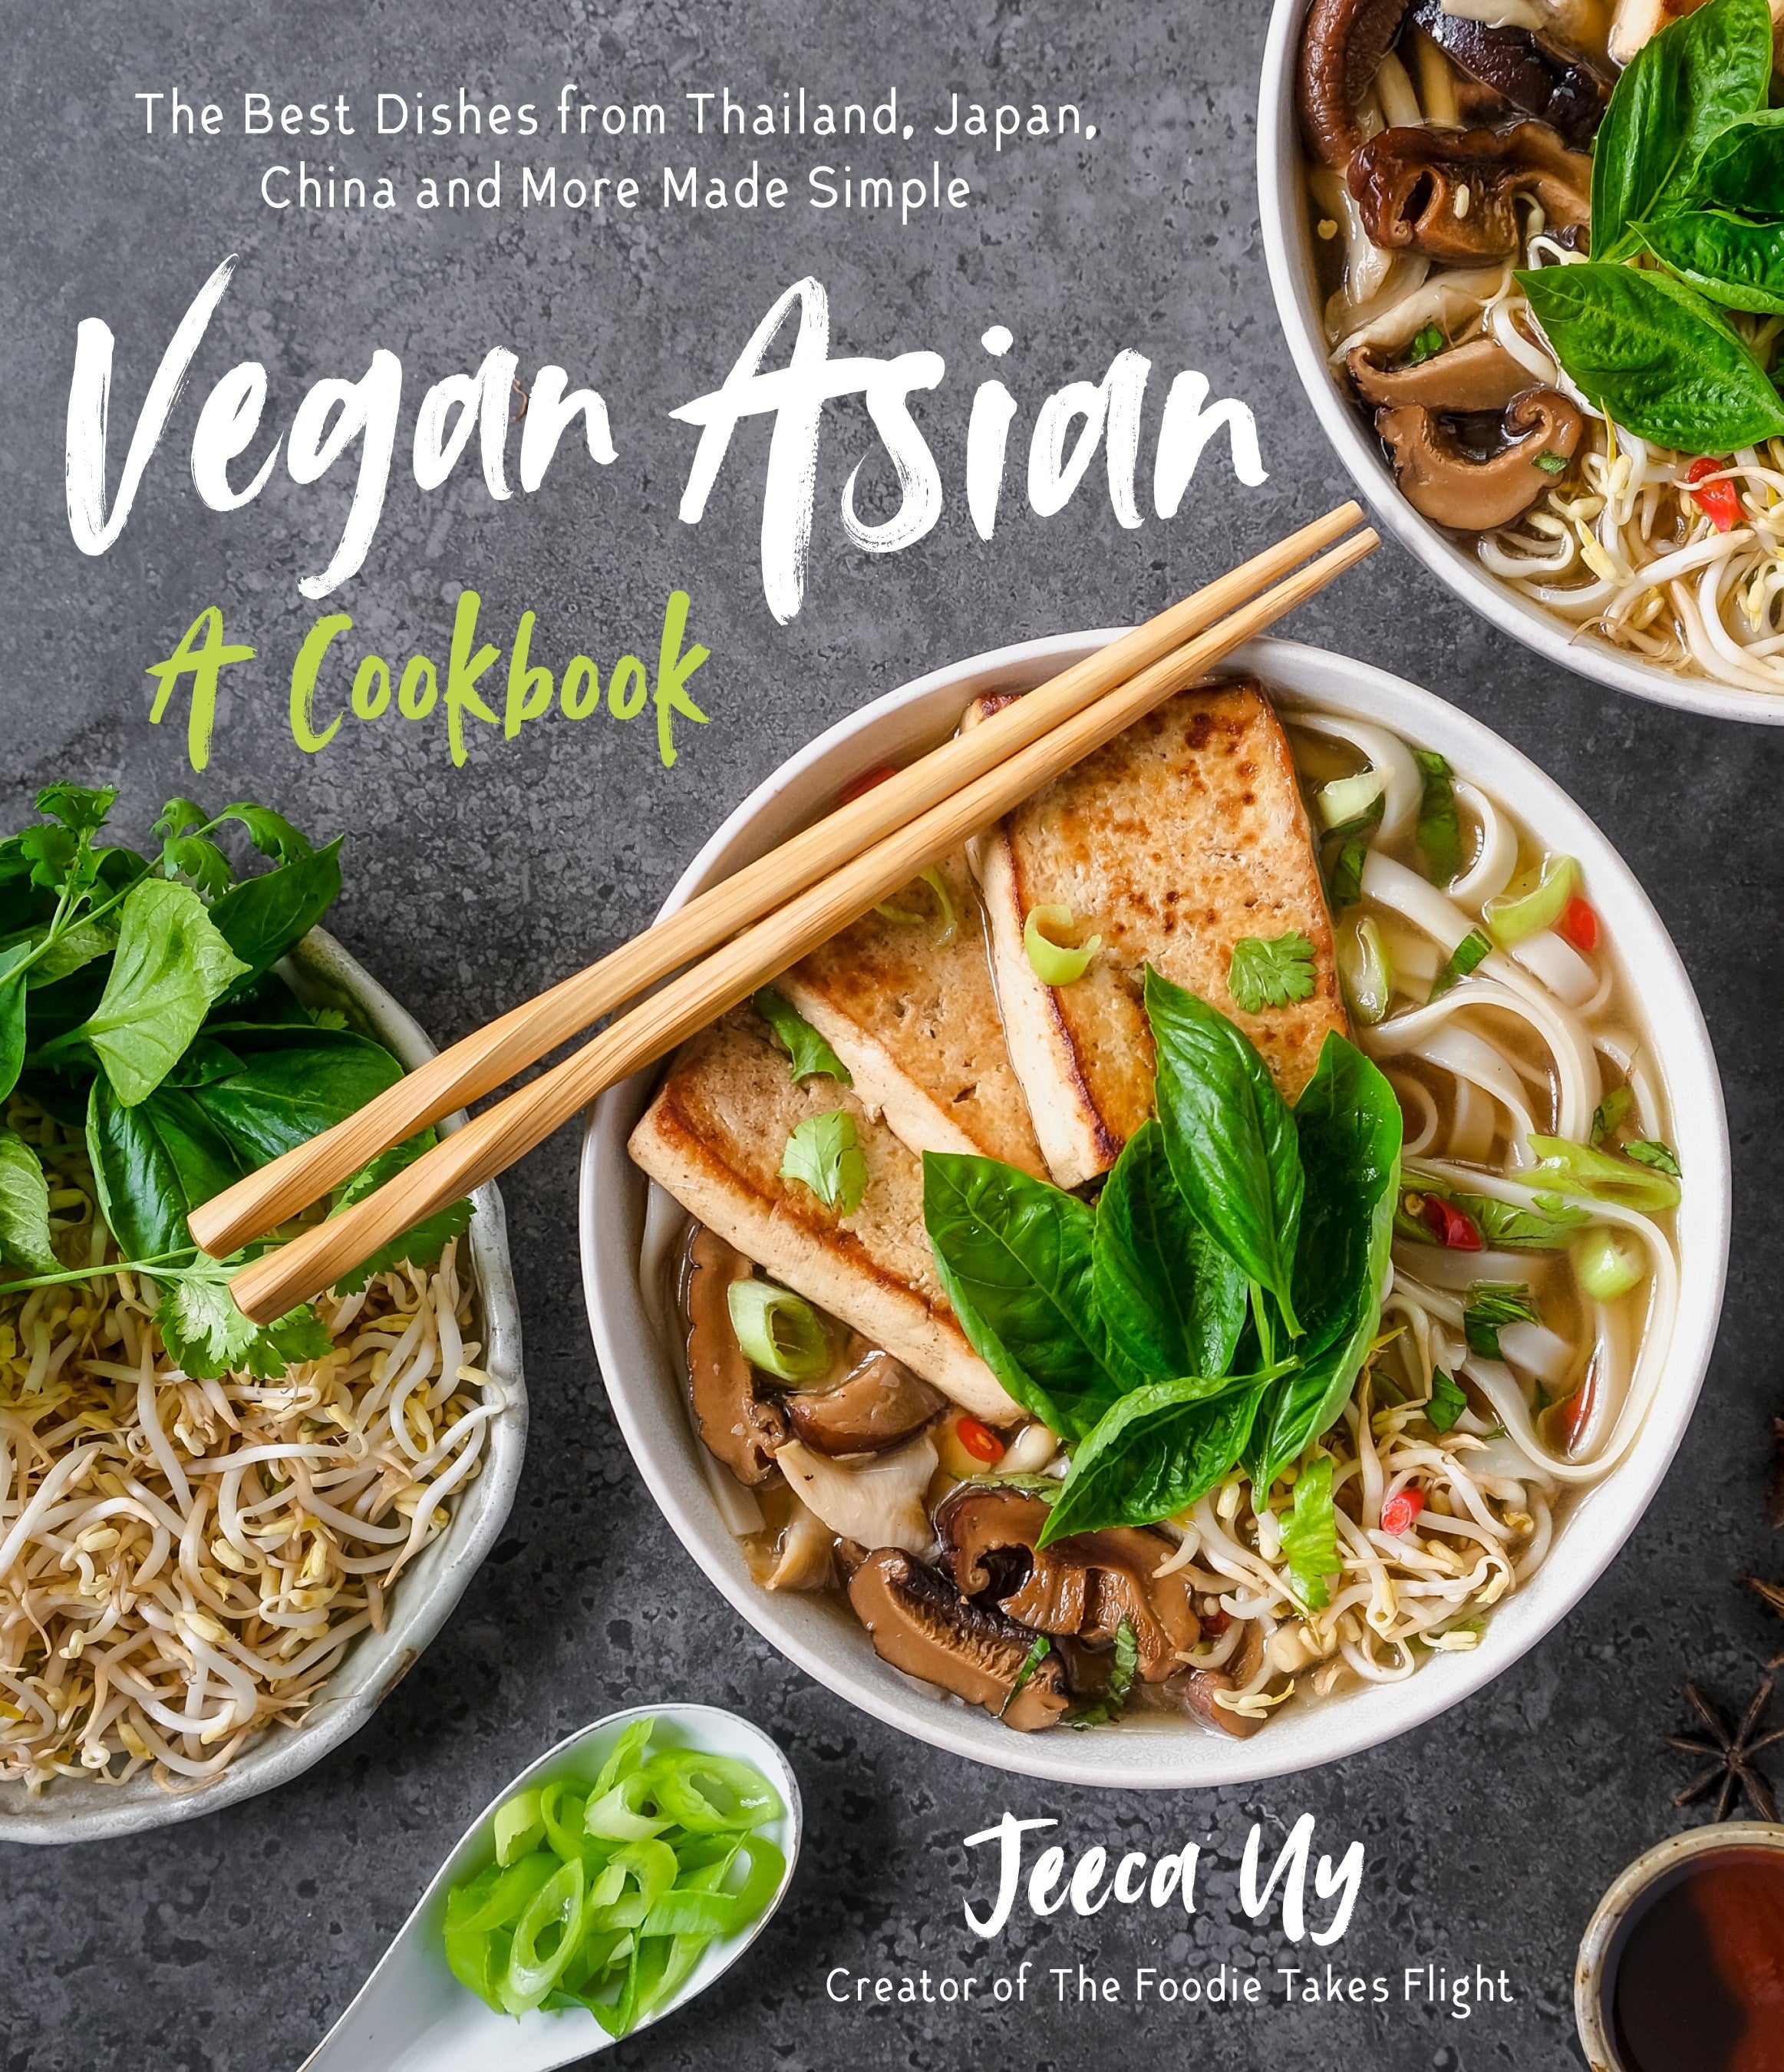 Vegan Asian: A Cookbook : The Best Dishes from Thailand, Japan, China and More Made Simple